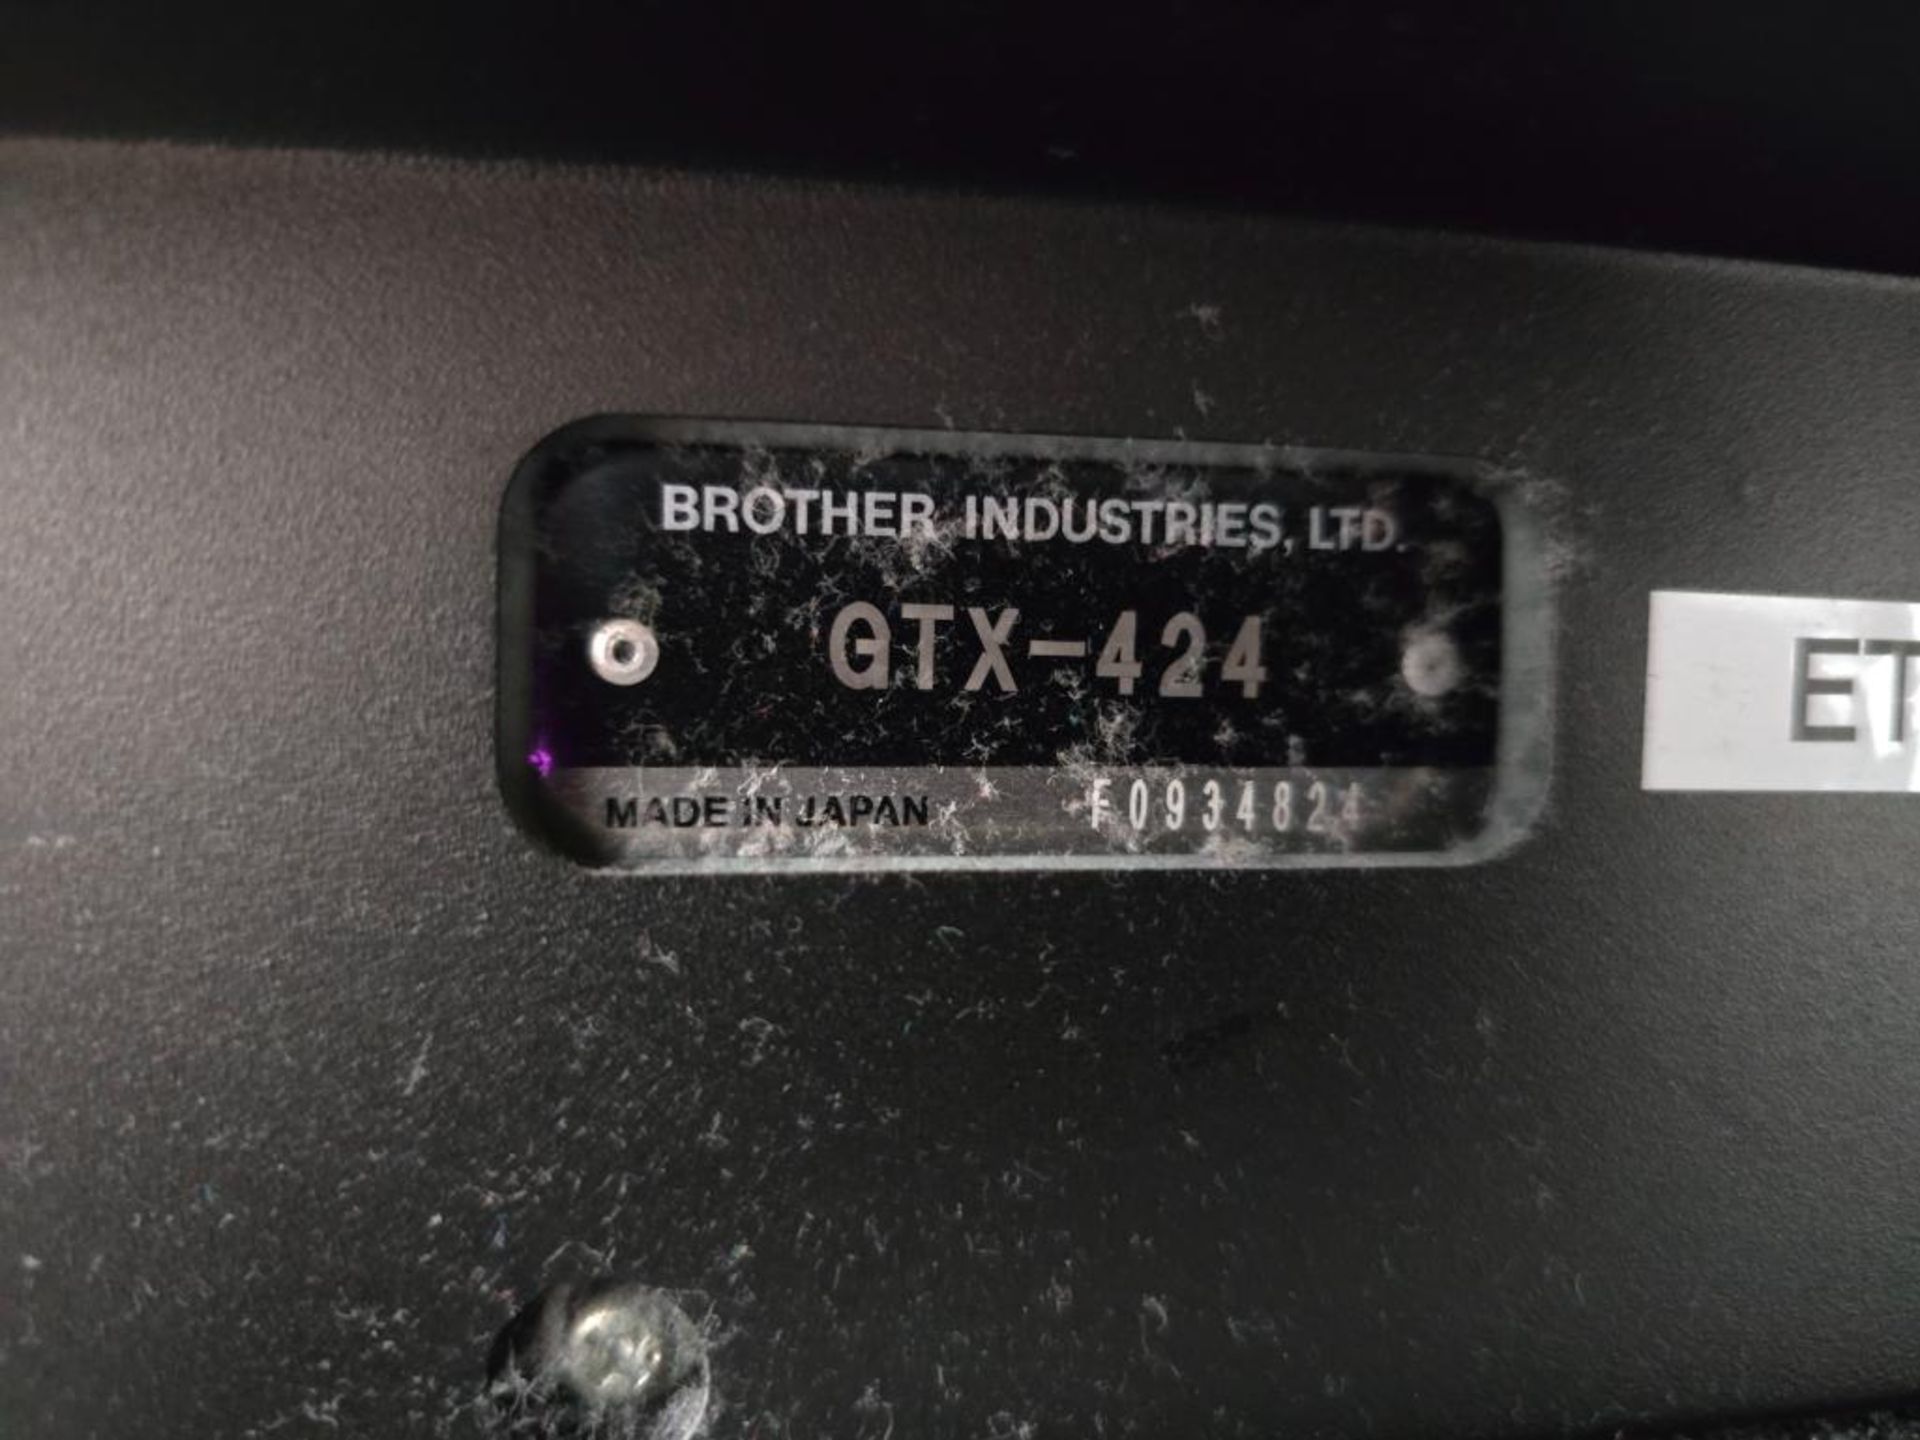 2022 Brother GTX-424 Pro-B DTG (Direct to Garment) Printer, Twin Head, 5-Color, Water Based Pigmente - Image 9 of 12